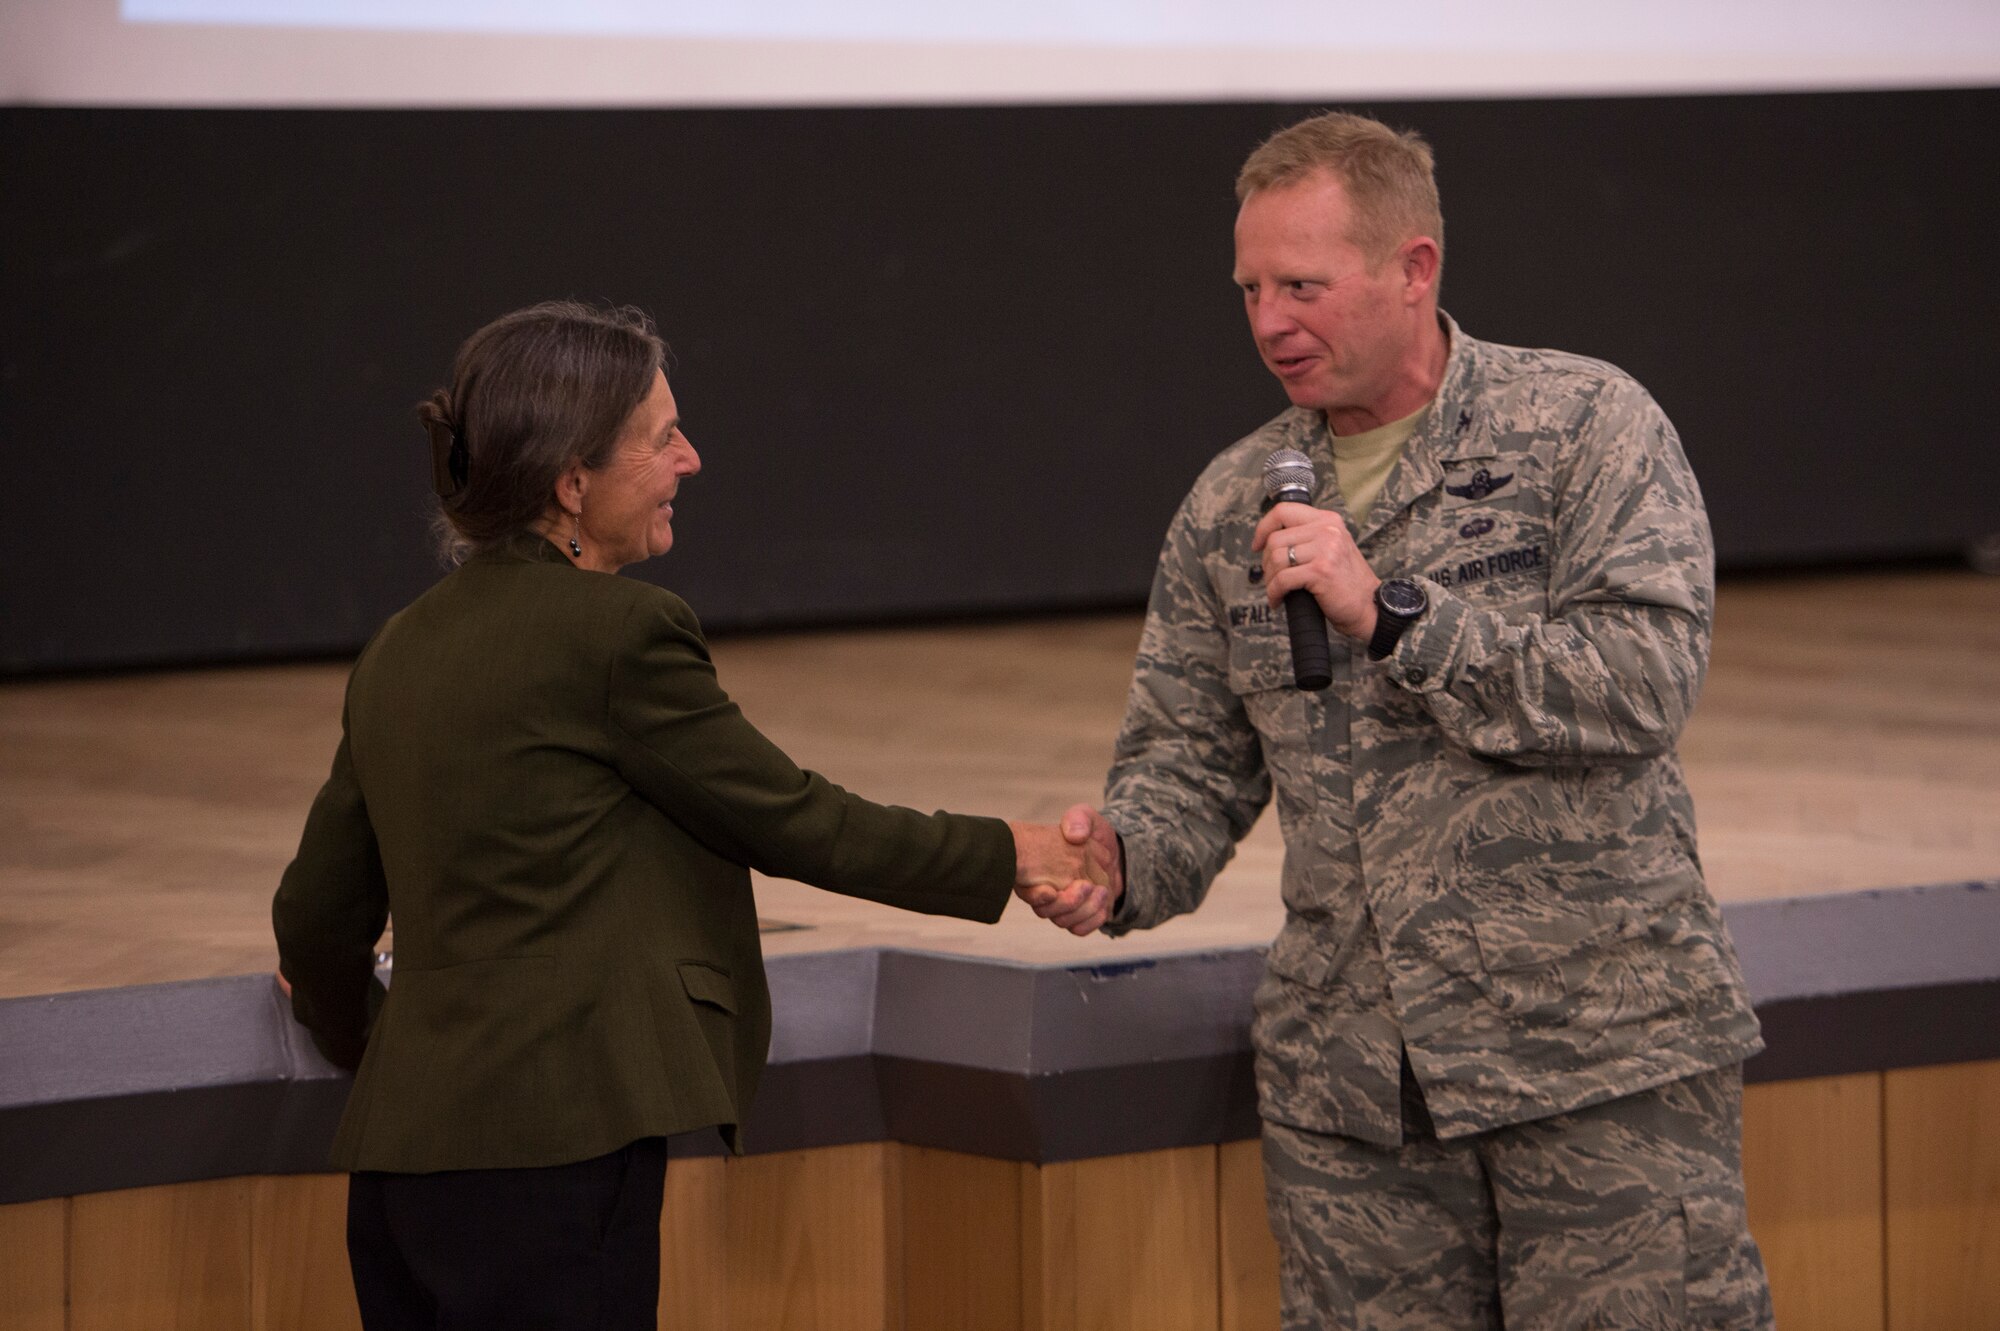 U.S. Air Force Col. Joe McFall, 52nd Fighter Wing commander, presents a coin to retired U.S. Army Brig. Gen. Rhanda Cornum, a Department of Defense resiliency consultant, at the base theater on Spangdahlem Air Base, Germany, June 4, 2015, during the 52nd Fighter Wing’s Resiliency Day. McFall thanked Cornum for being the key speaker kicking off the base’s resiliency themed events for the day. (U.S. Air Force photo by Staff Sgt. Christopher Ruano/Released)